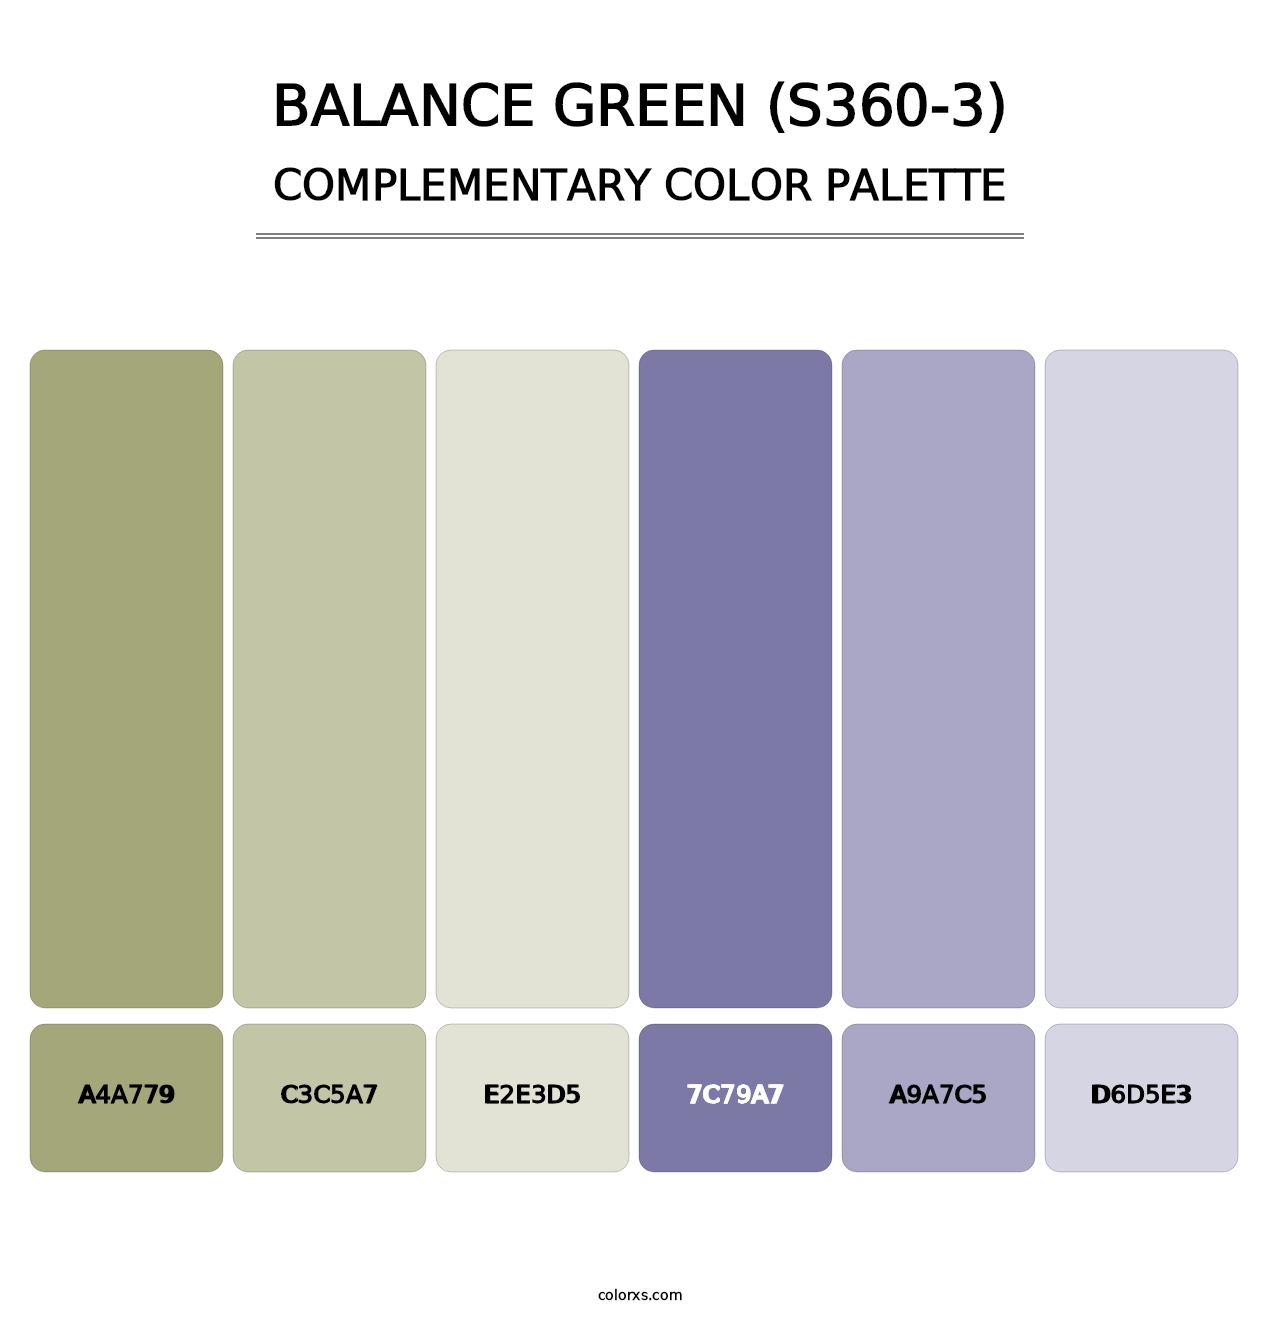 Balance Green (S360-3) - Complementary Color Palette